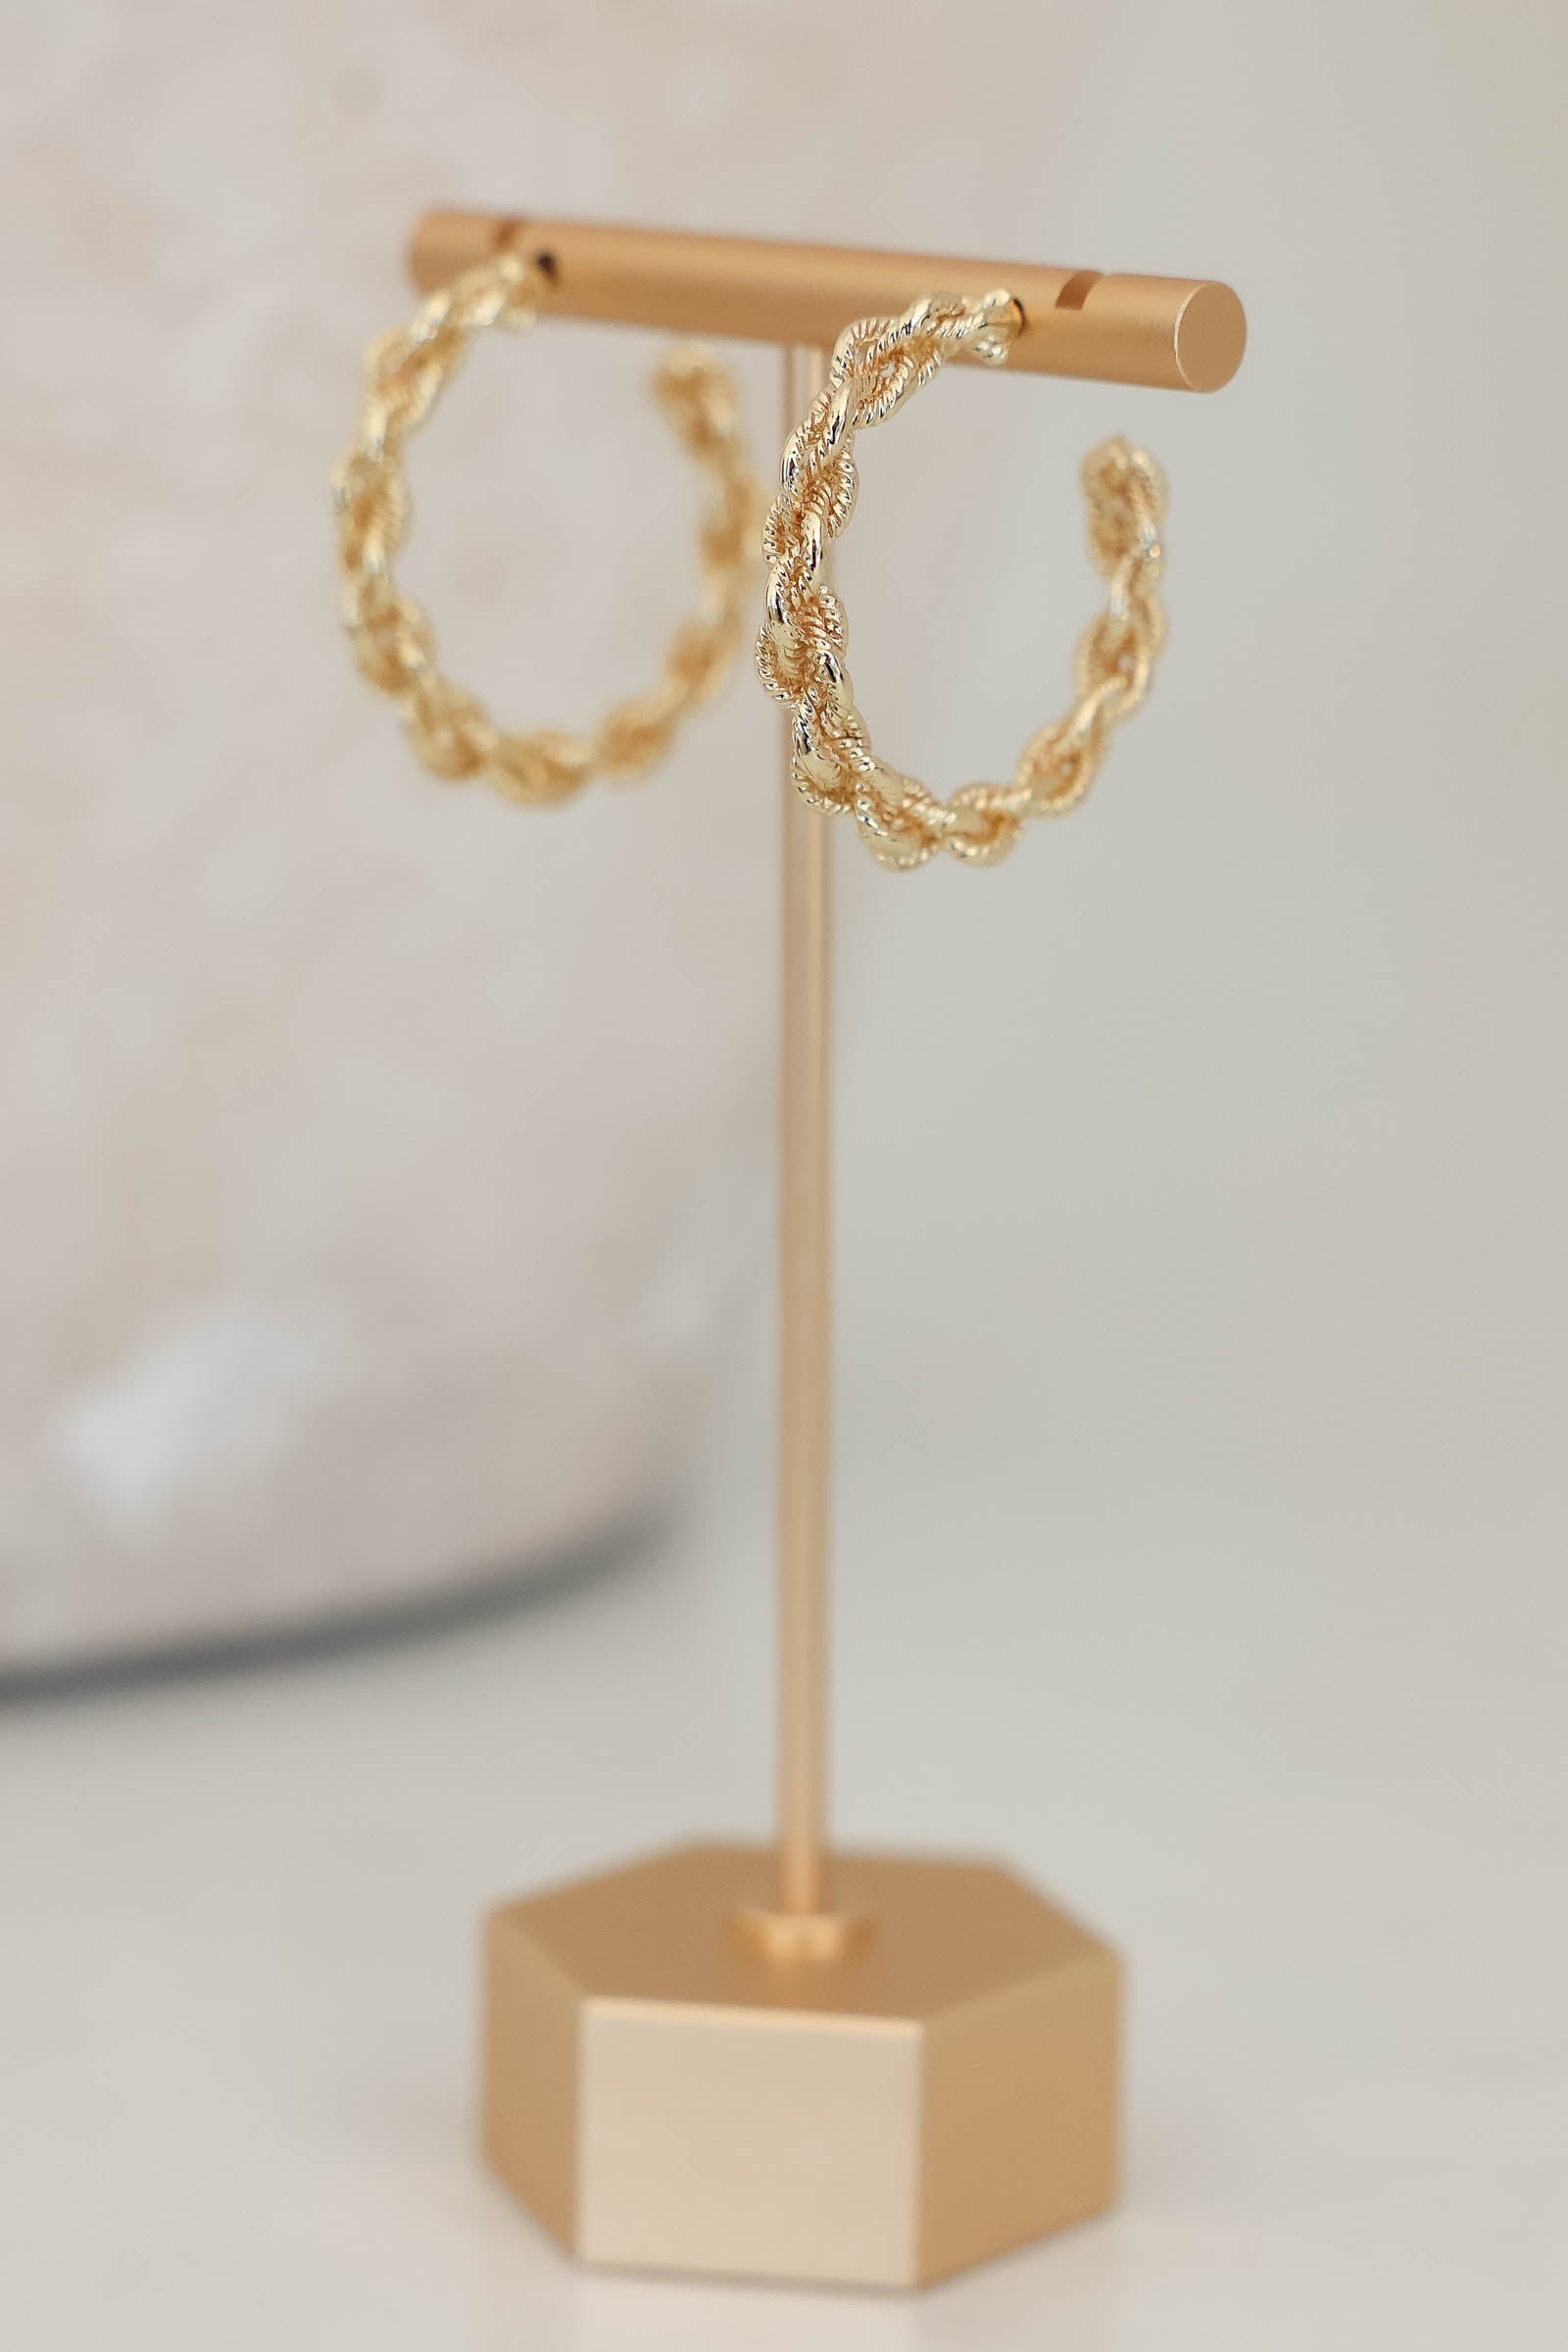 Coastal Connection Hoop Earrings - Gold, Closet Candy, 1